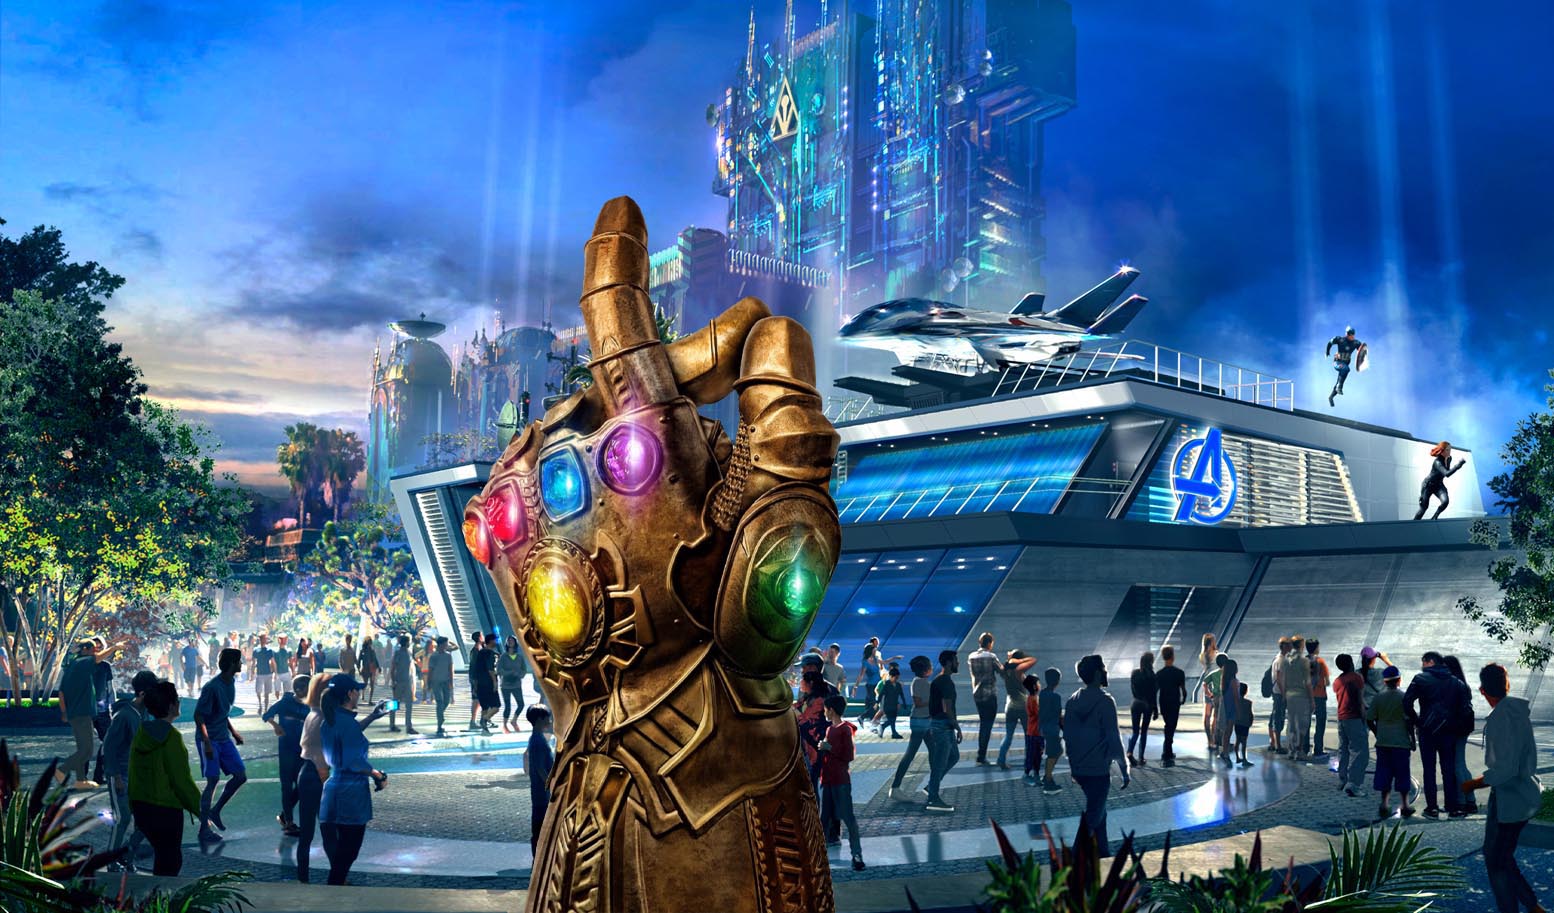 At Disneyland’s Avengers Campus…The Thanos Snap Never Happened